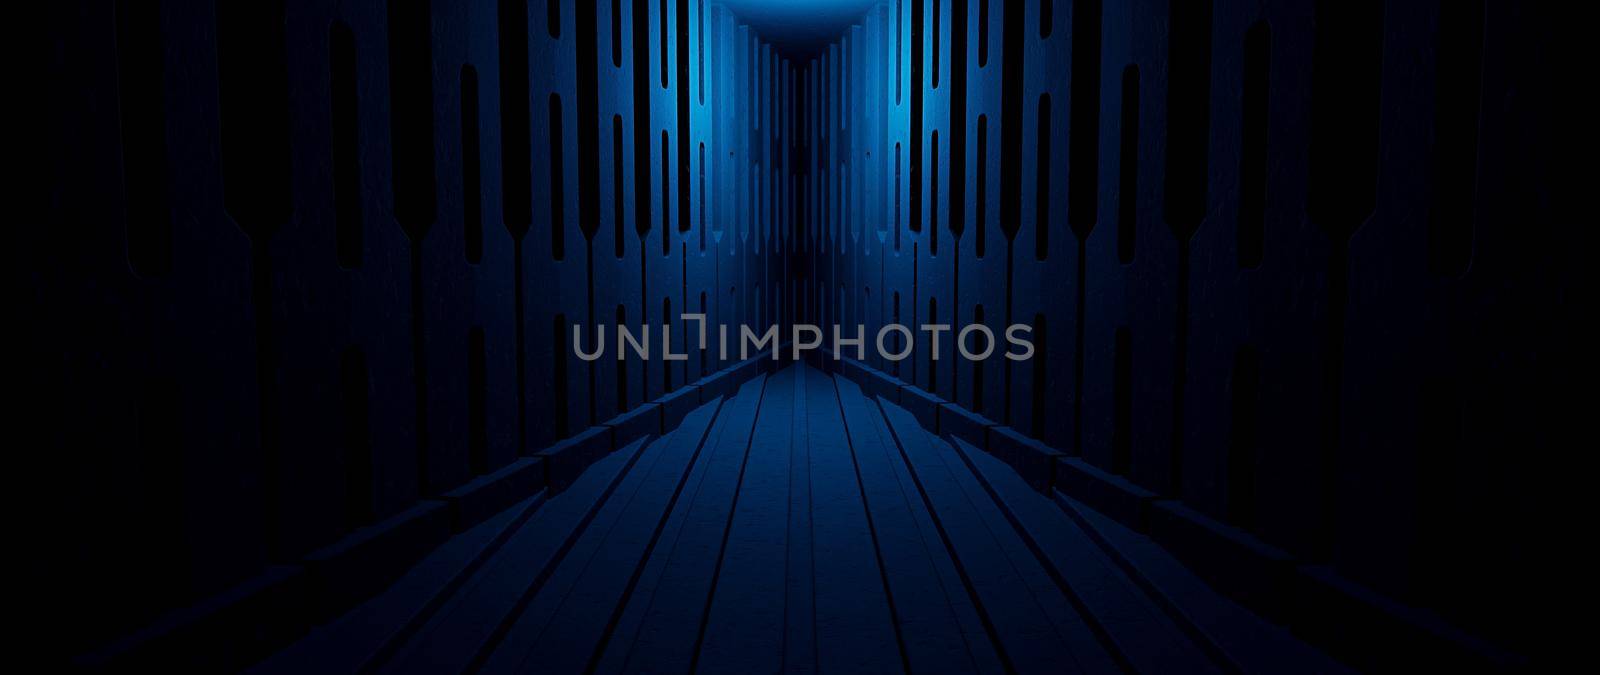 Modern Digital Simulation Cyber Warehouse Futuristic Interior Dark Black Abstract Background With Space For Products 3D Rendering